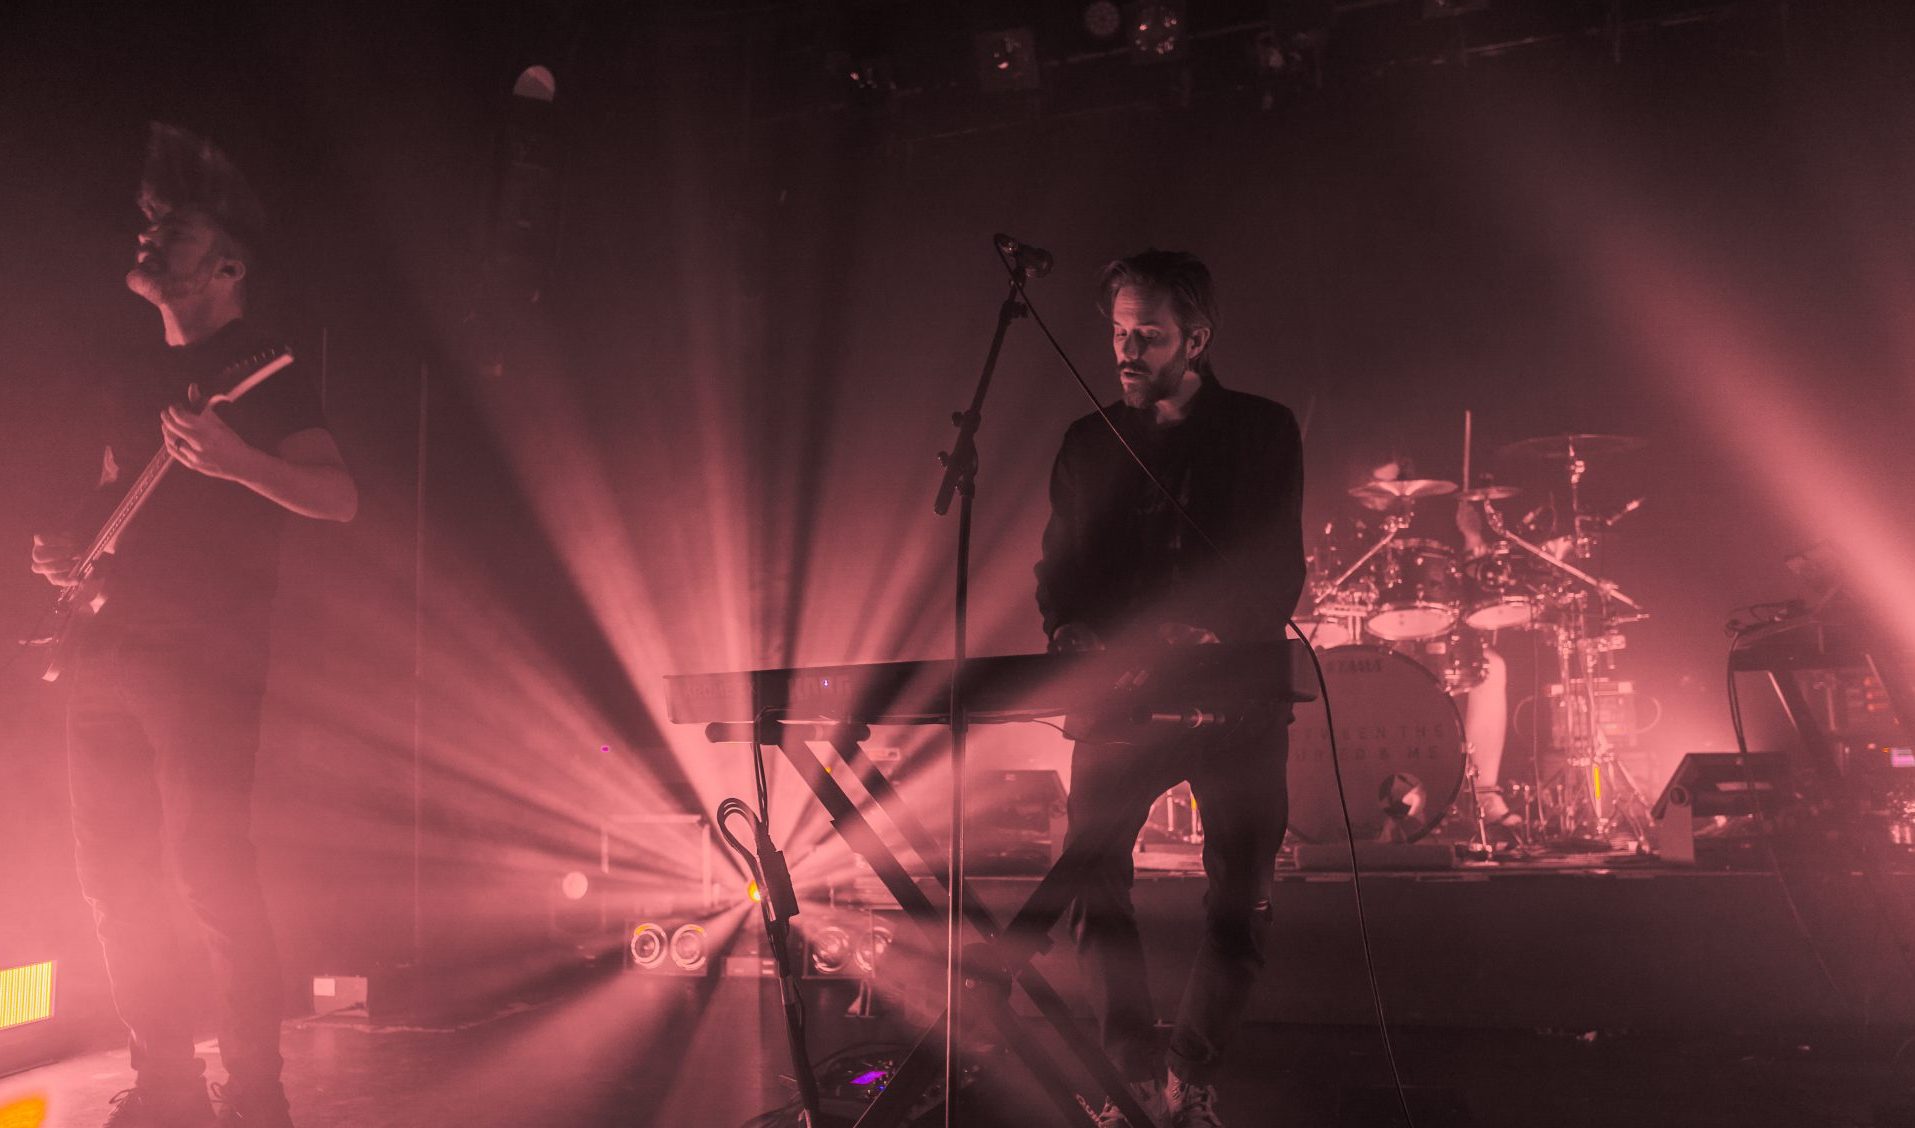 Live Review: Between The Buried And Me - 1. Oktober 2019 - Szene Wien